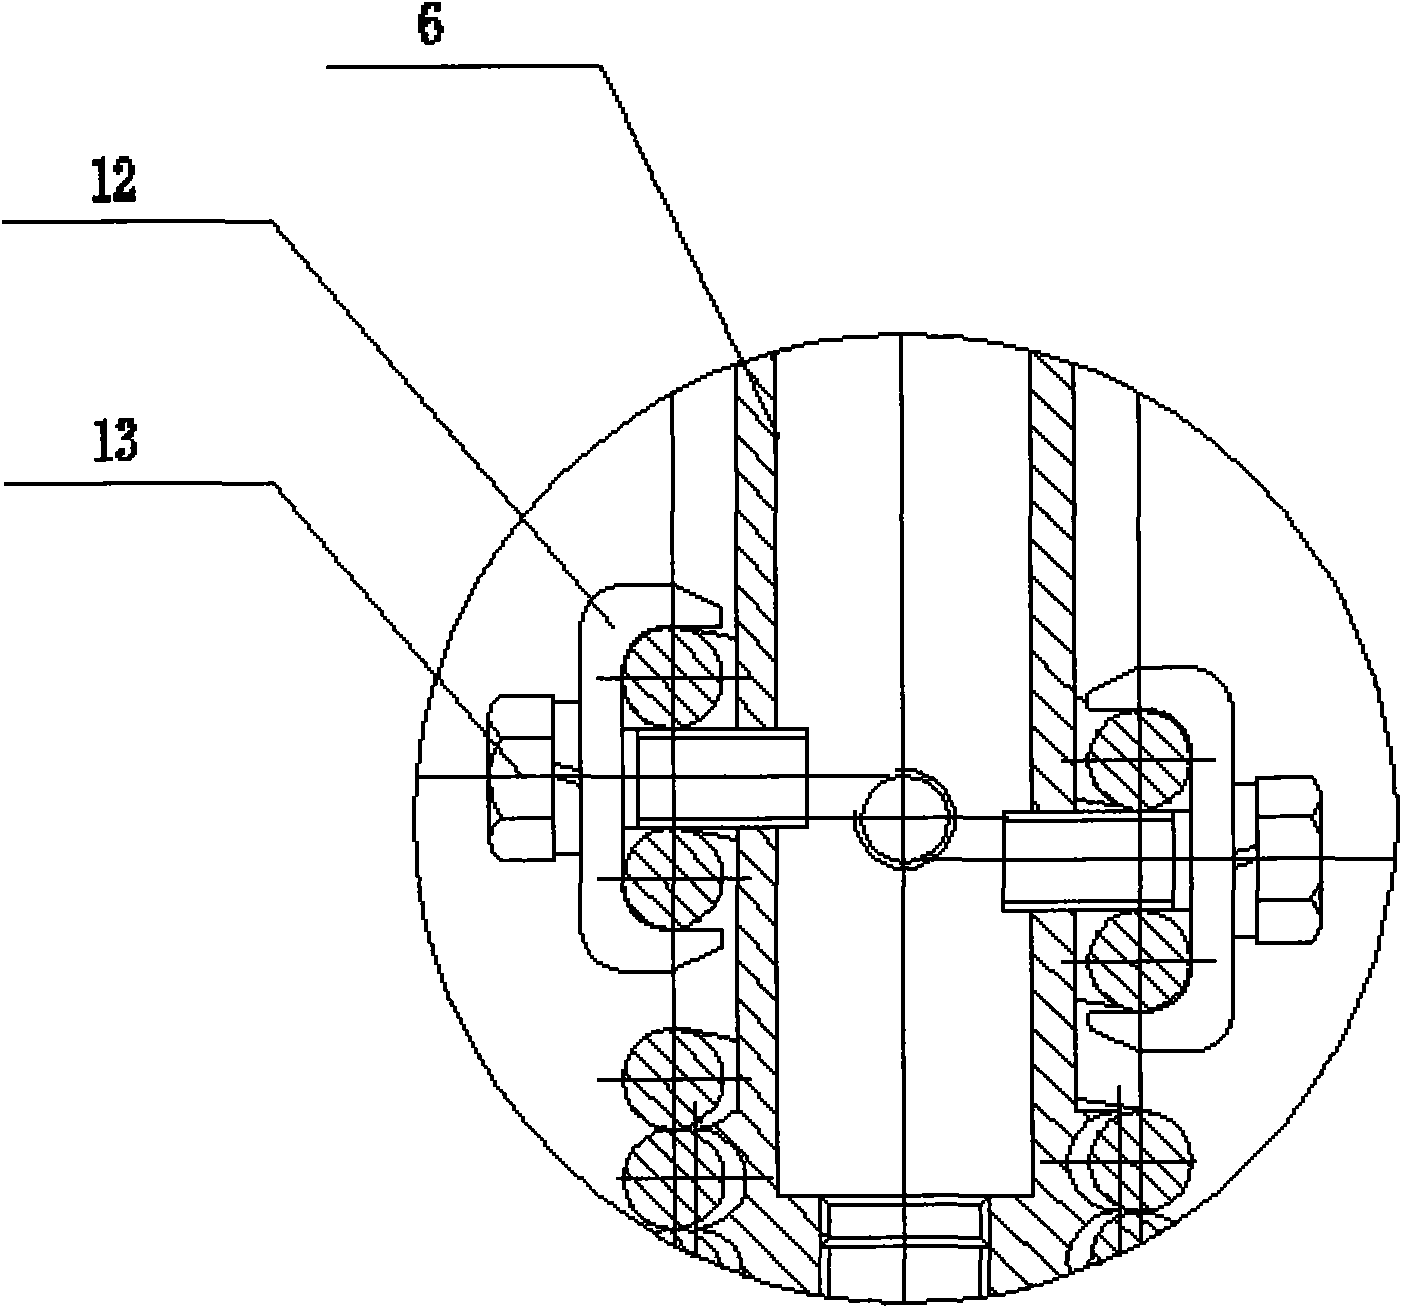 Suspended frequency modulation mass damper